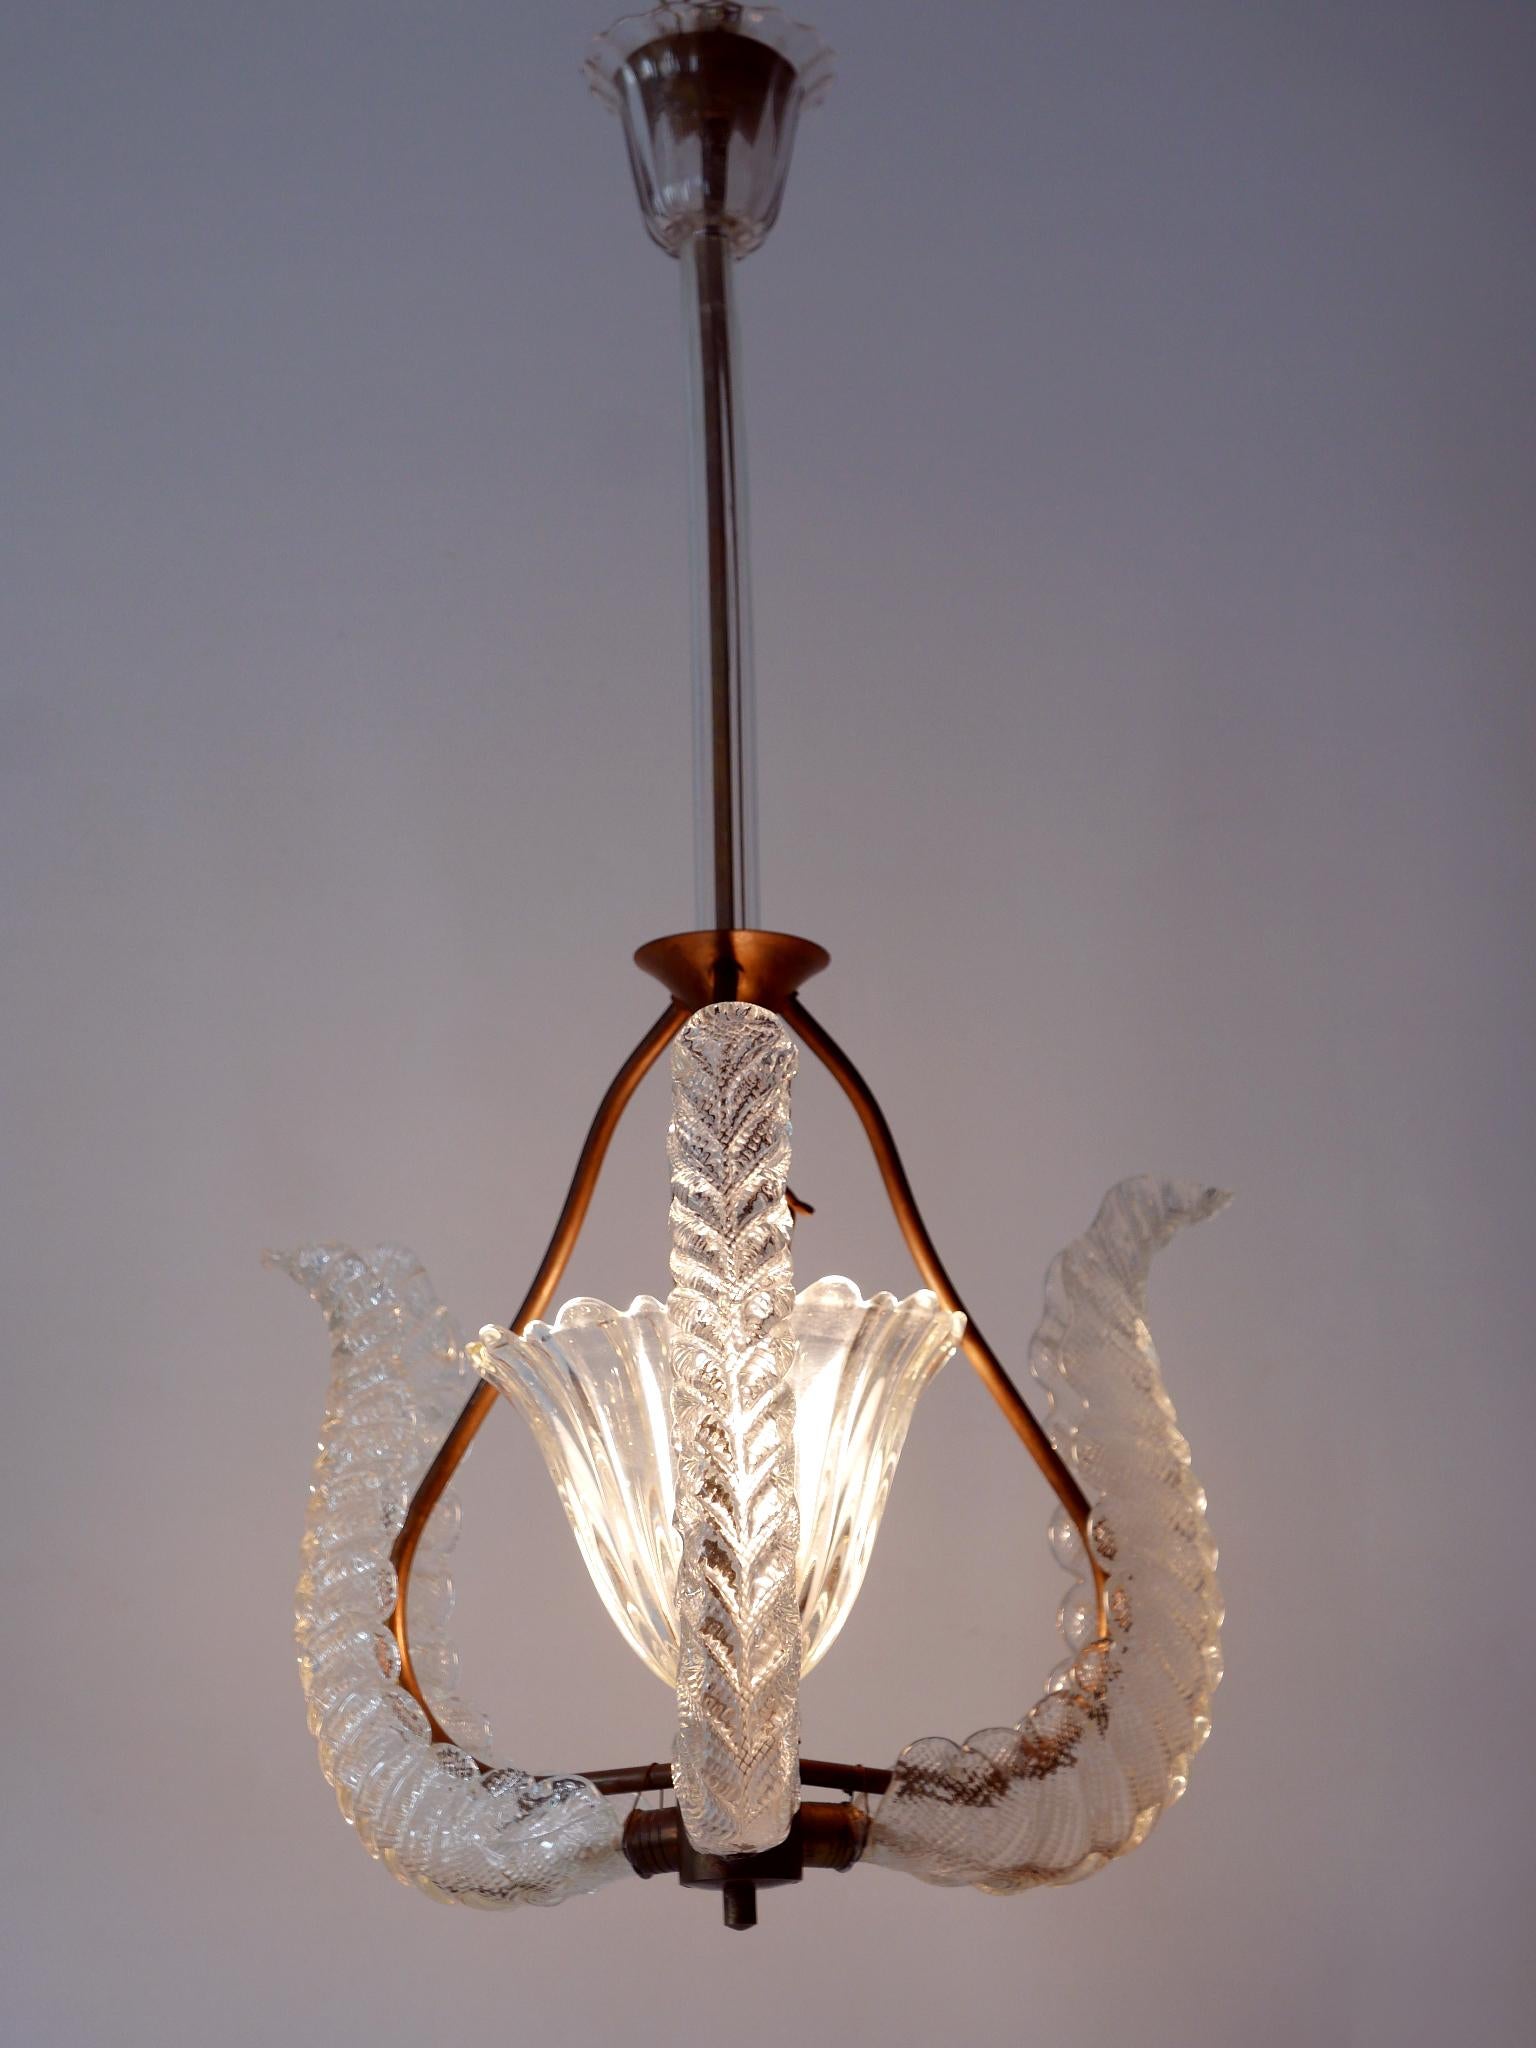 Rare Mid Century Modern Chandelier or Pendant Lamp 'Putti' by Barovier & Toso For Sale 2